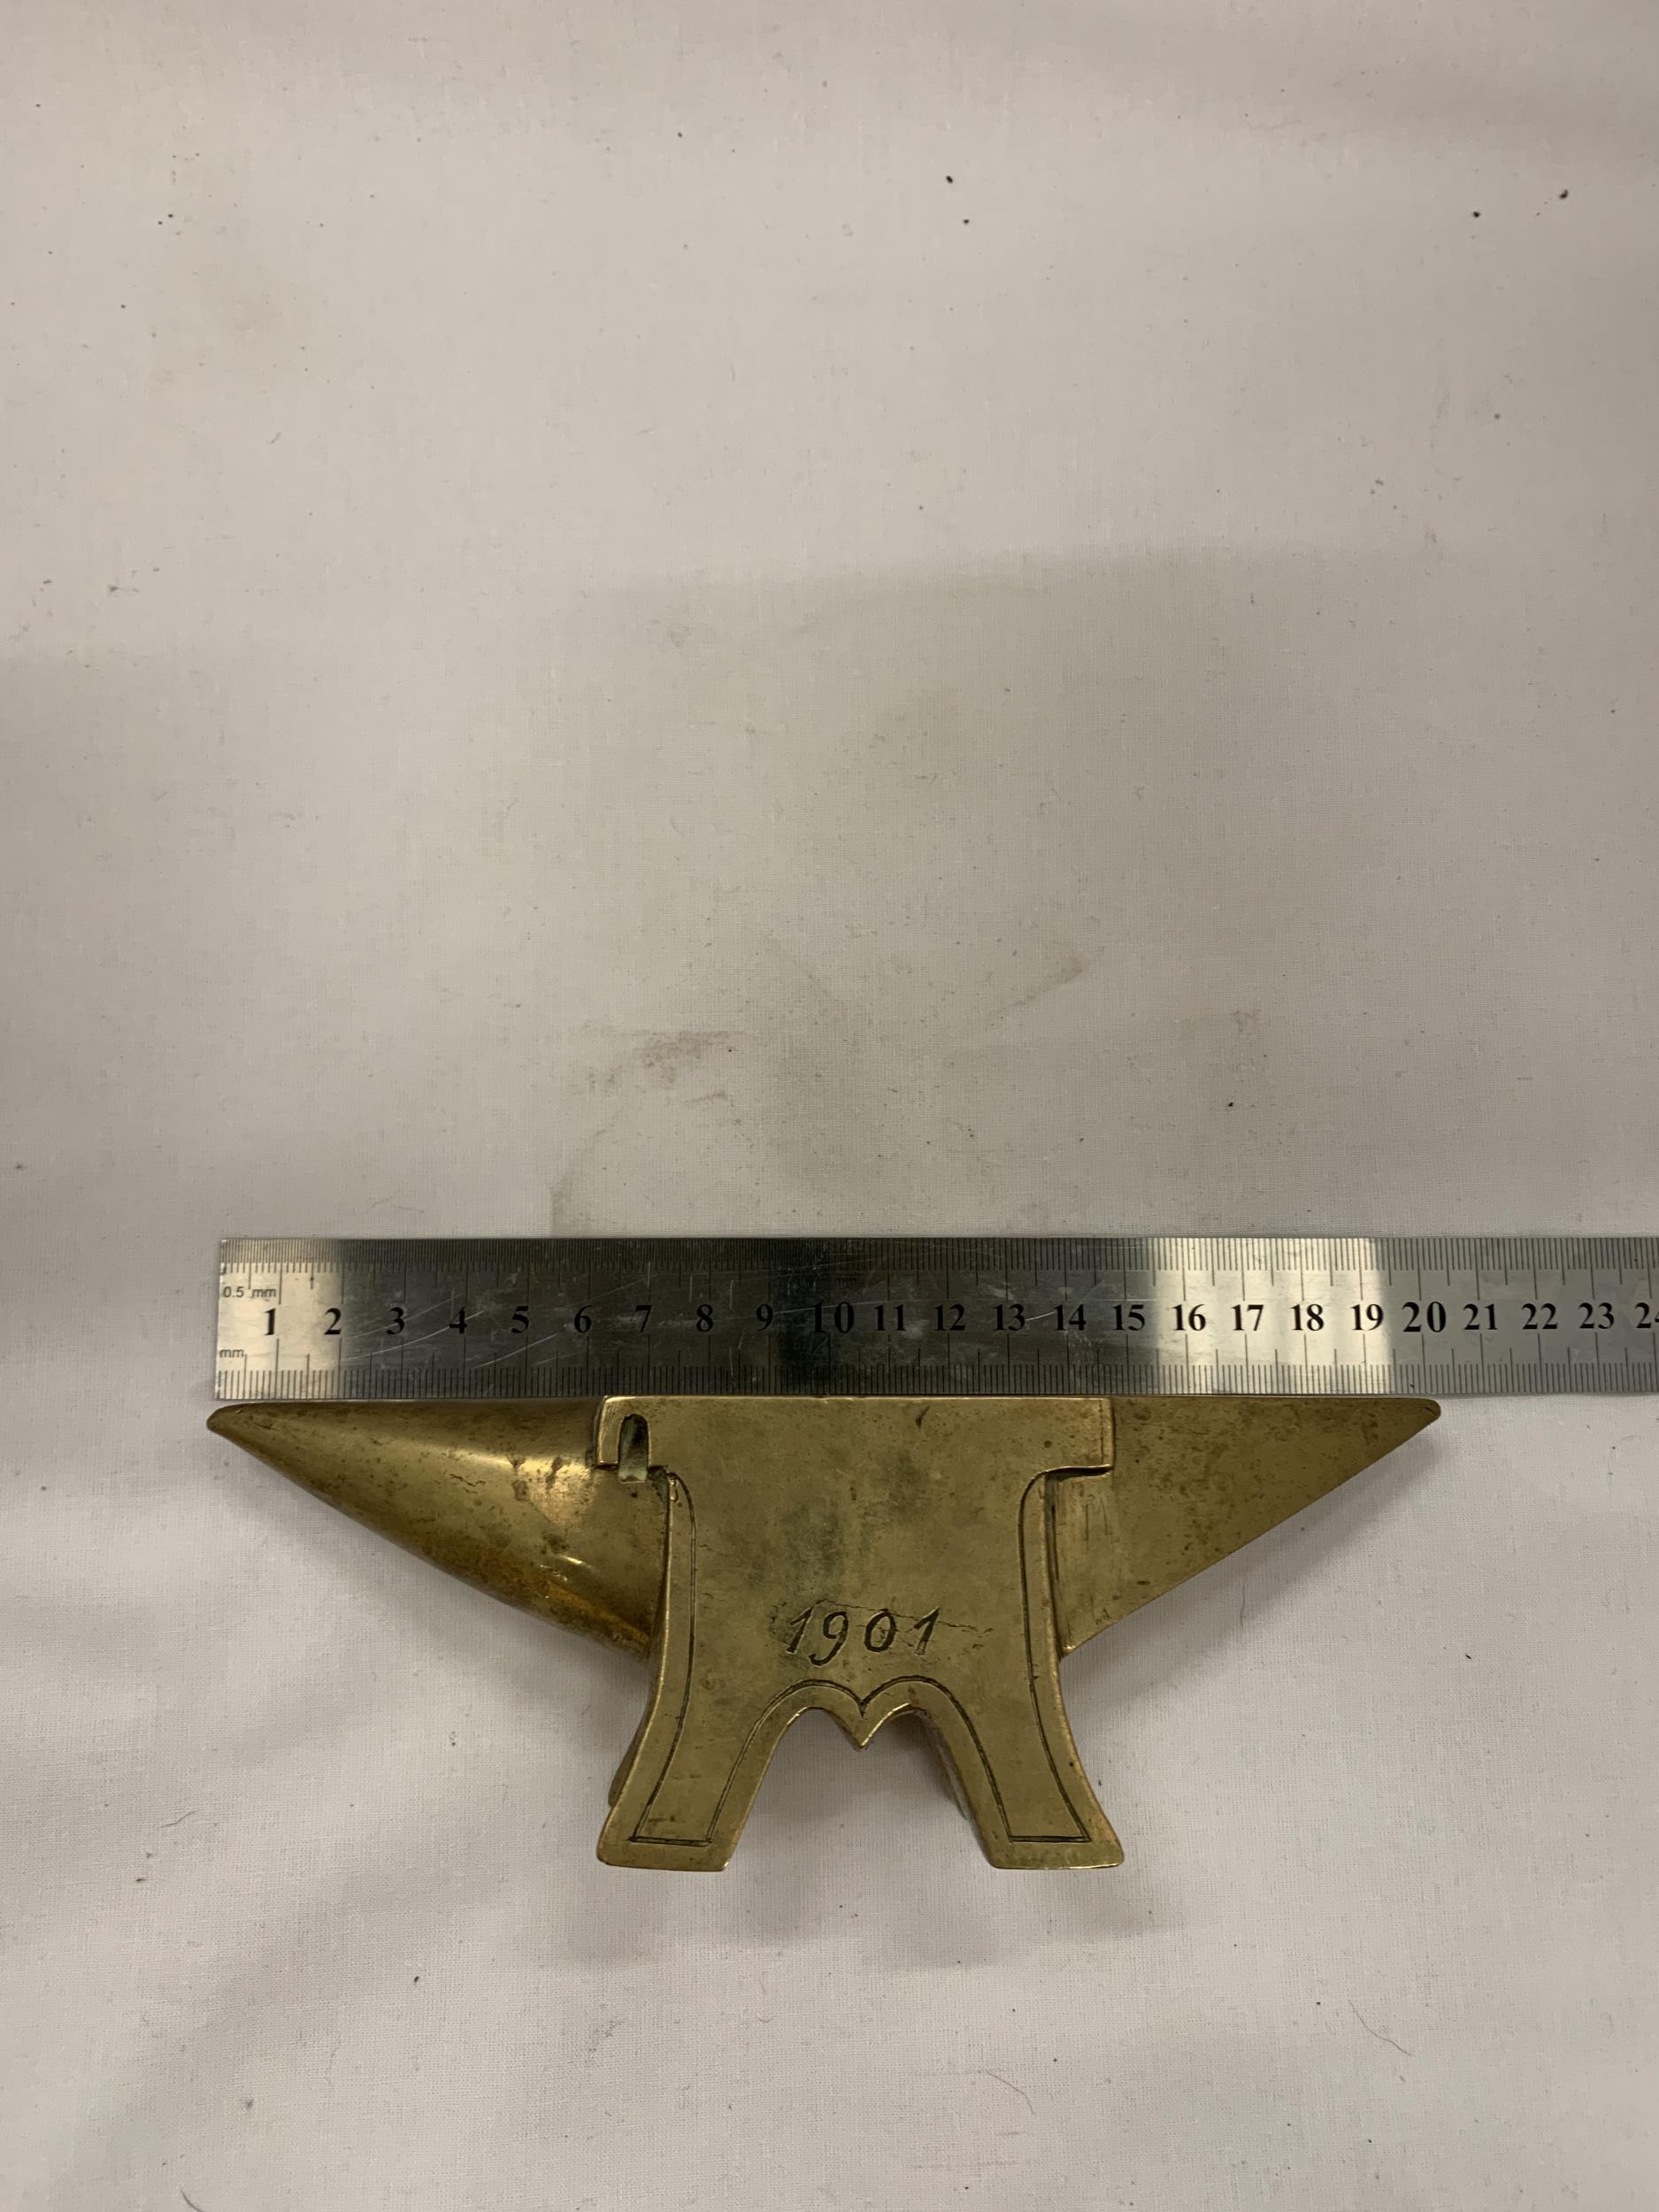 A MINIATURE BRONZE FORGE 1901 ANVIL, LENGTH 20 CM - Image 5 of 5